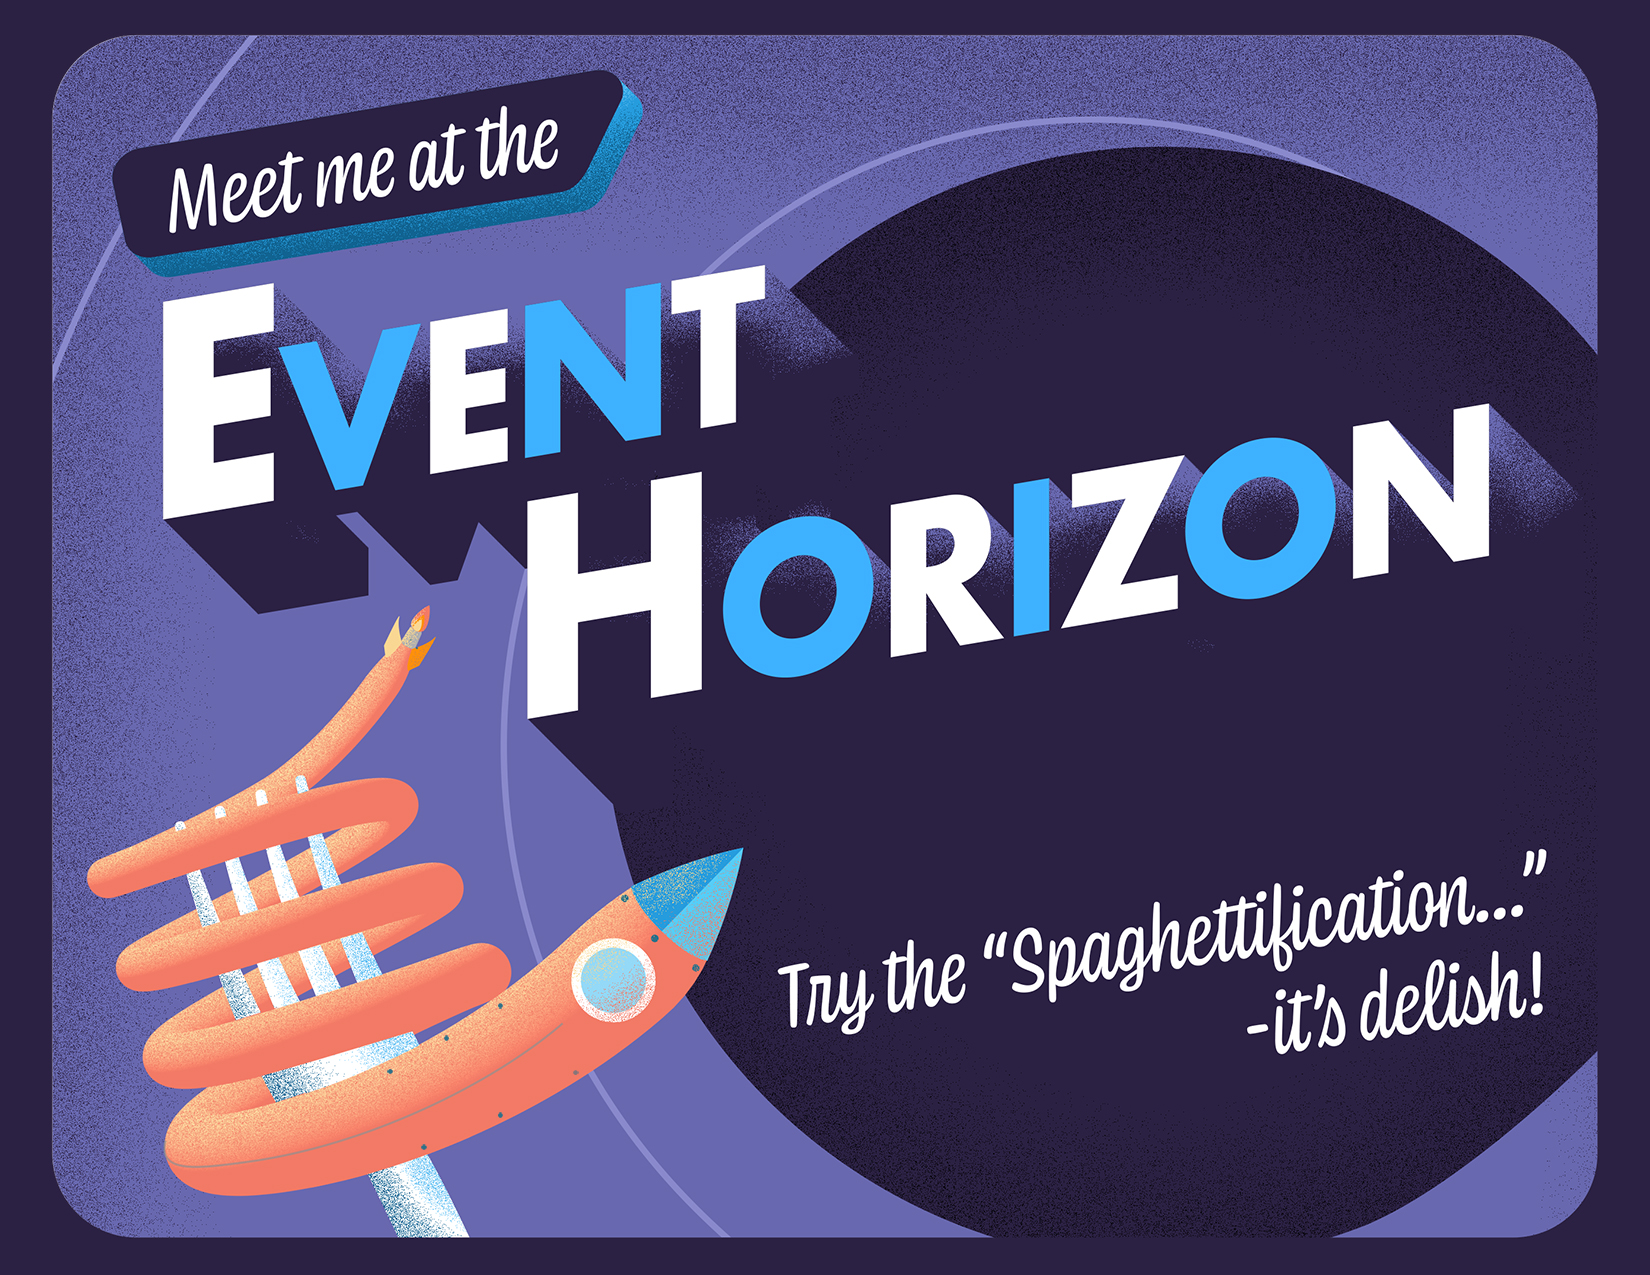 postcard with text reading "Meet me at the Event Horizon"